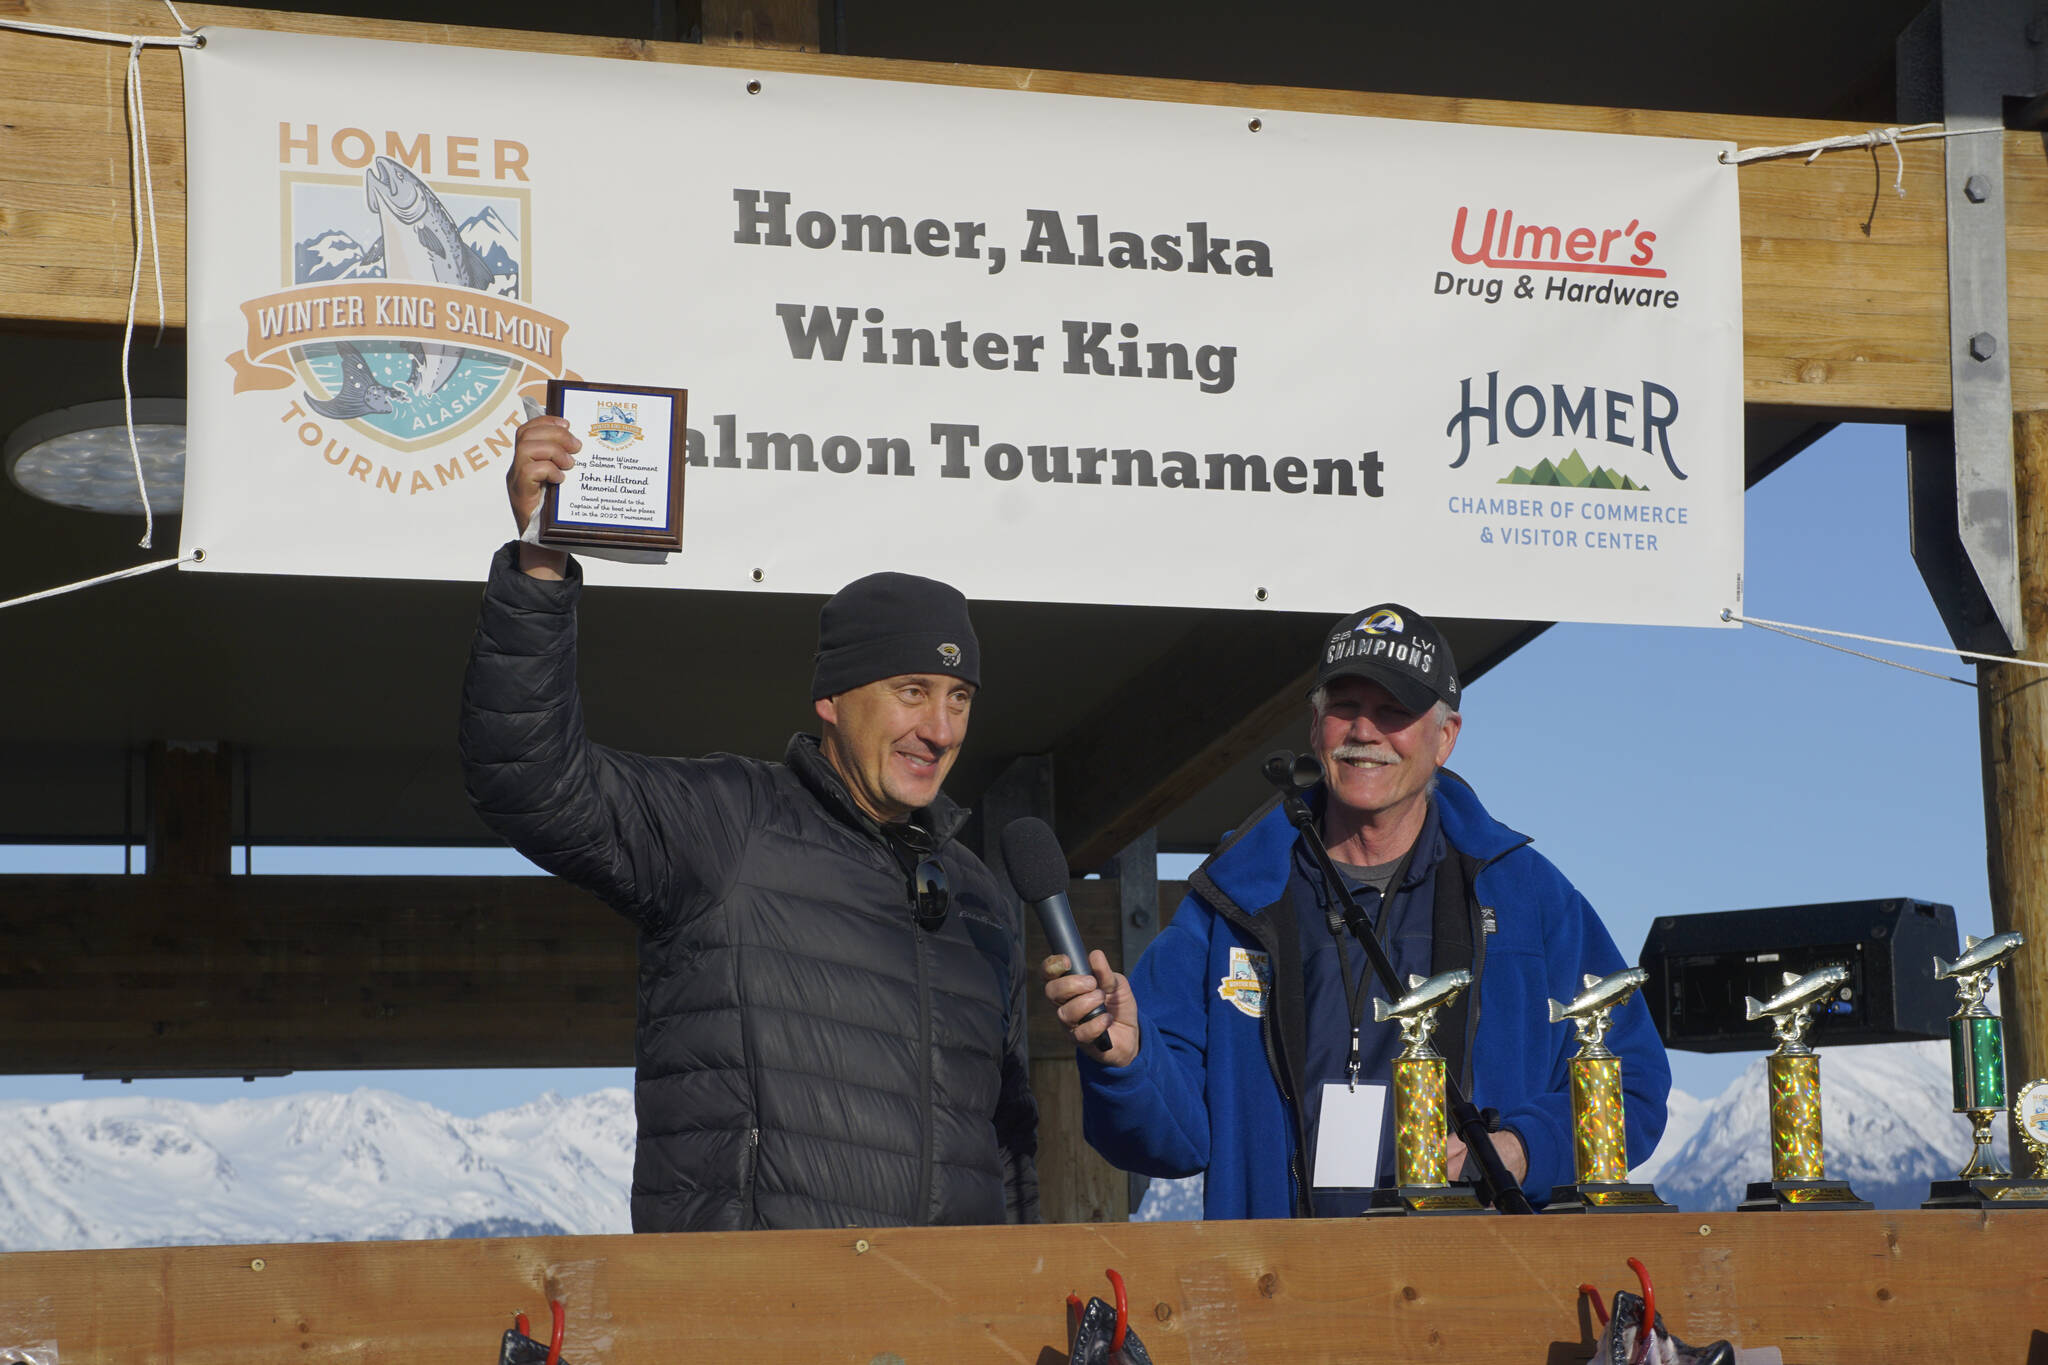 Jay Marley, left, captain of the Fly Dough, holds up the John Hillstrand Memorial Award for running the boat that had the winning fish in the 28th annual Homer Winter King Salmon Tournament. Homer Chamber of Commerce and Visitor Center executive director Brad Anderson is at right. Marley’s son, Weston Marley, won the top prize with a 27.38-pound king salmon. Jay Marley also was the top captain in 2021 when his son Andrew also won the tournament. (Photo by Michael Armstrong/Homer News)